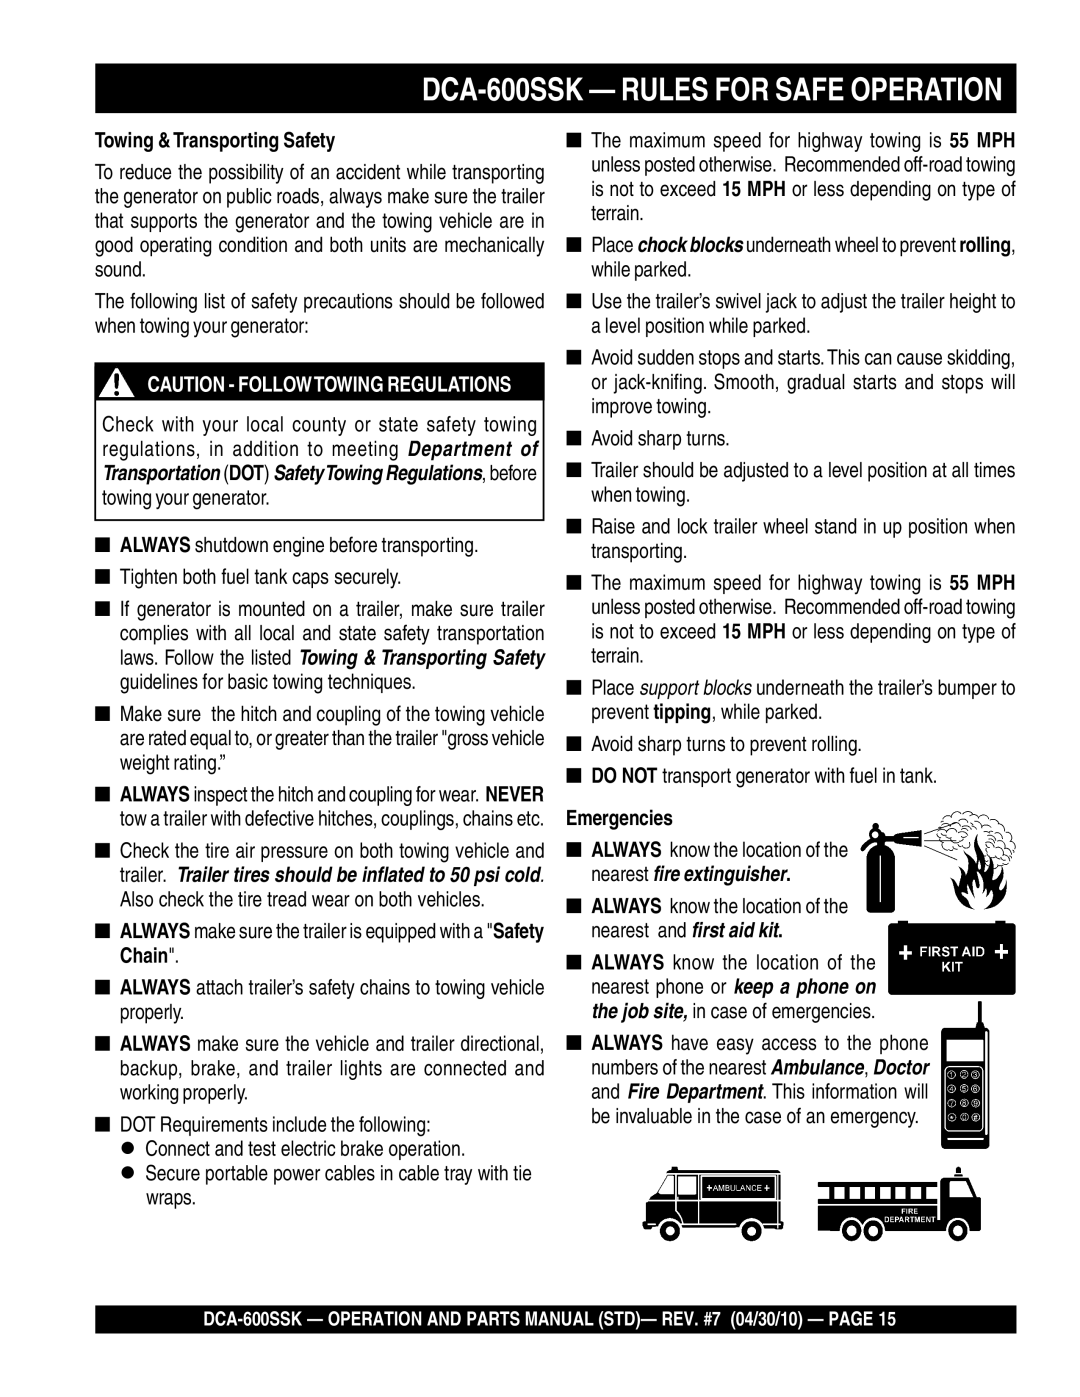 Multiquip operation manual DCA-600SSK - RULES FOR SAFE OPERATION, Towing & Transporting Safety, Emergencies 